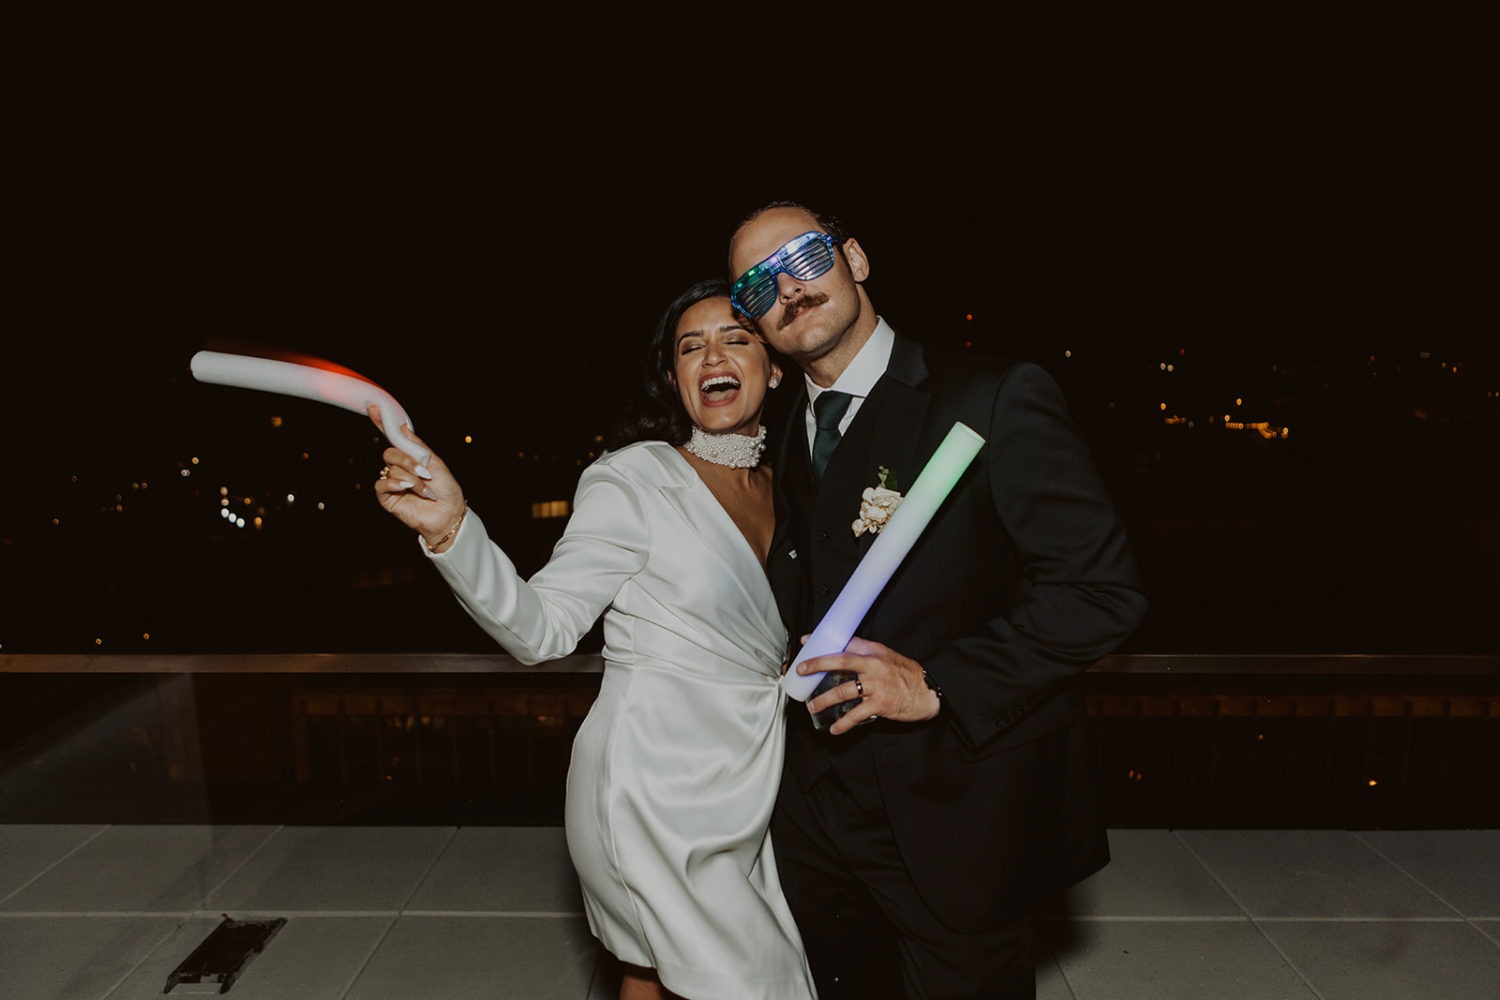 couple dances with glow sticks and sunglasses at wedding reception dance party